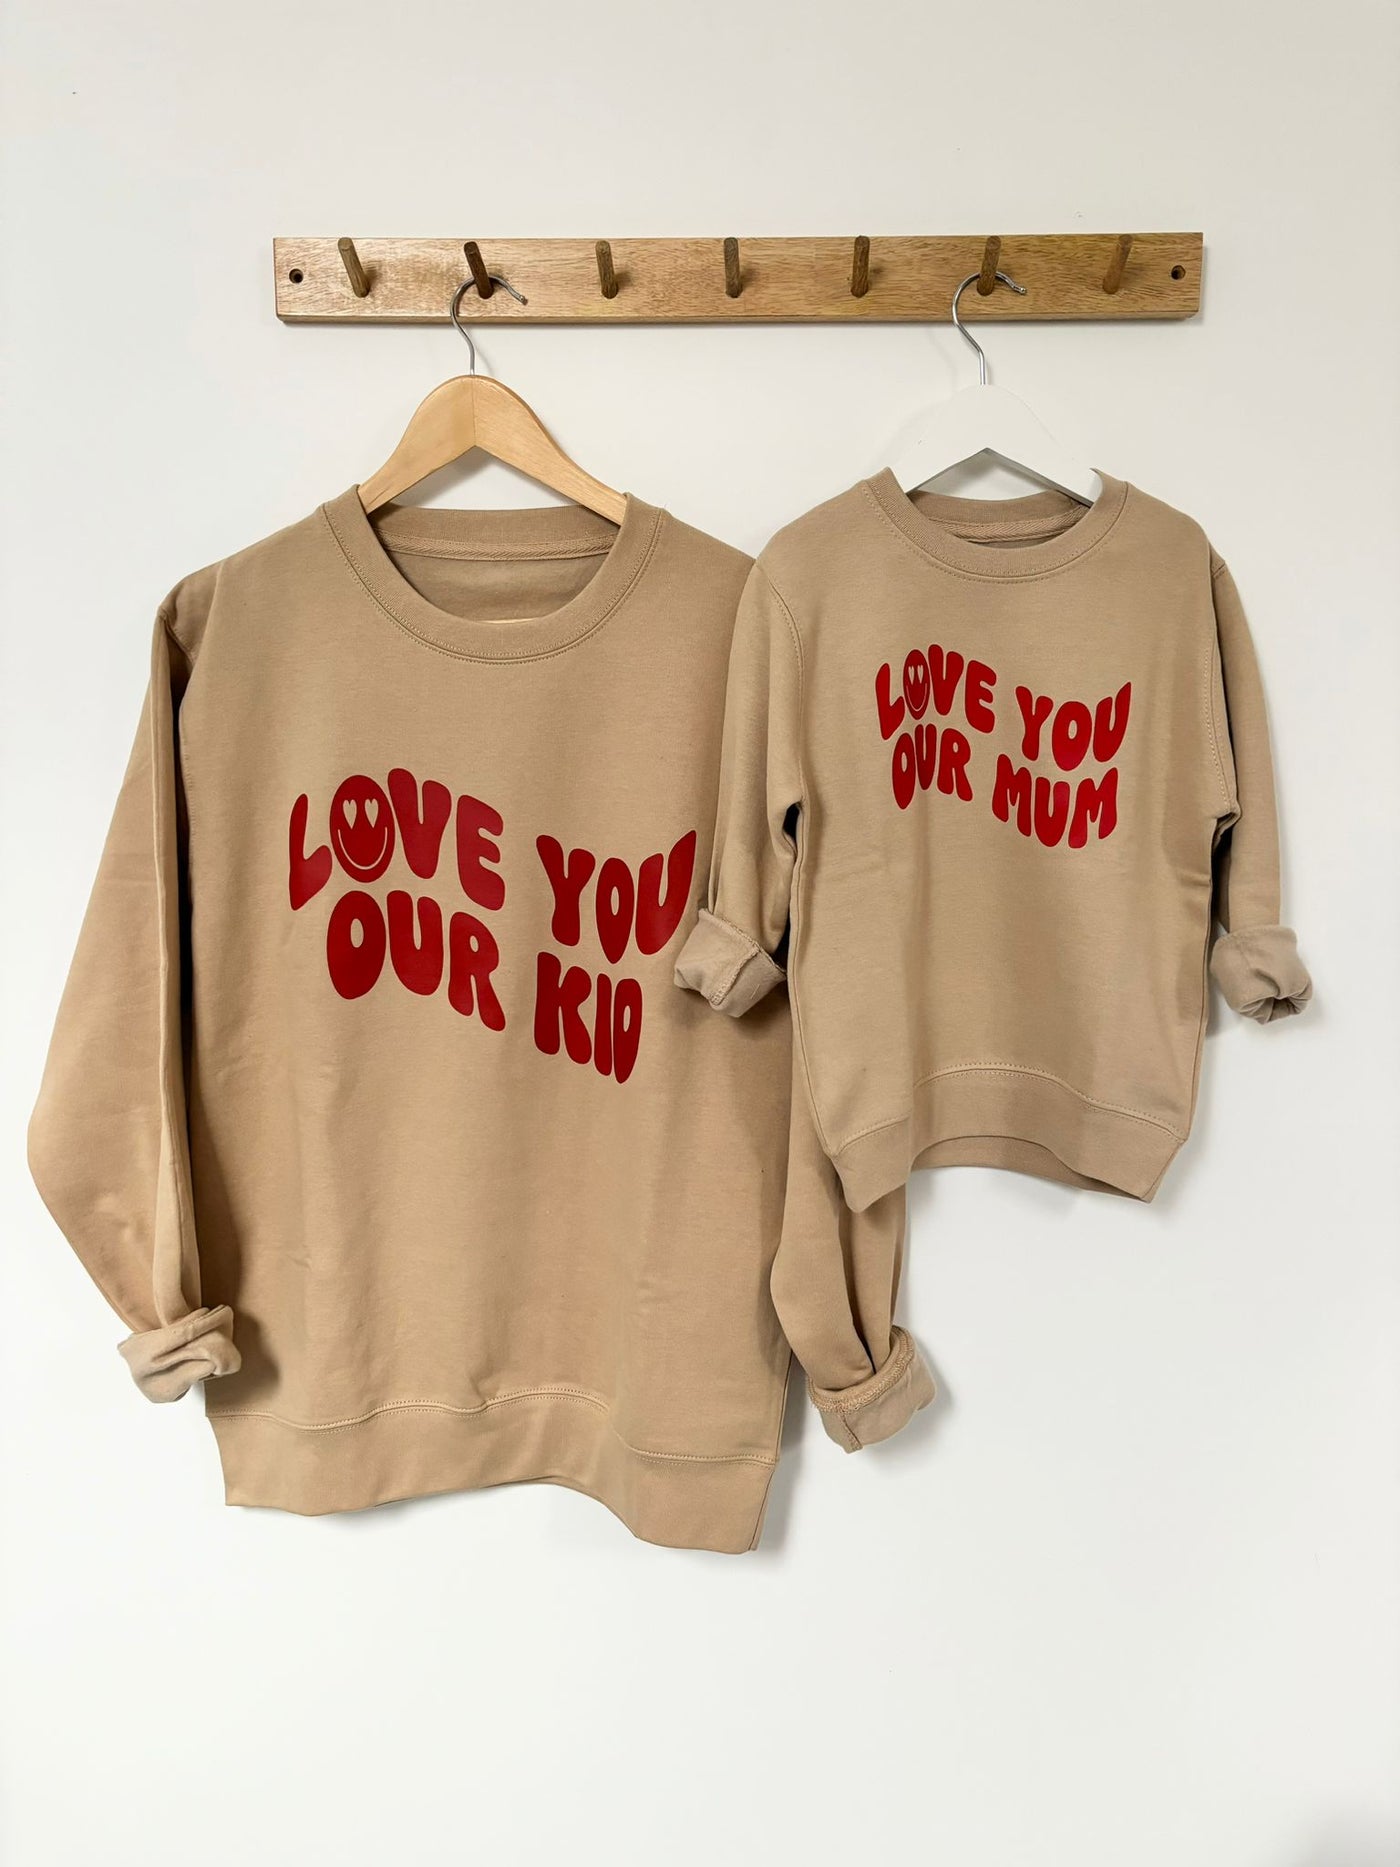 Our Albie ‘Love You Our Mum’ sweatshirt for kids in desert sand